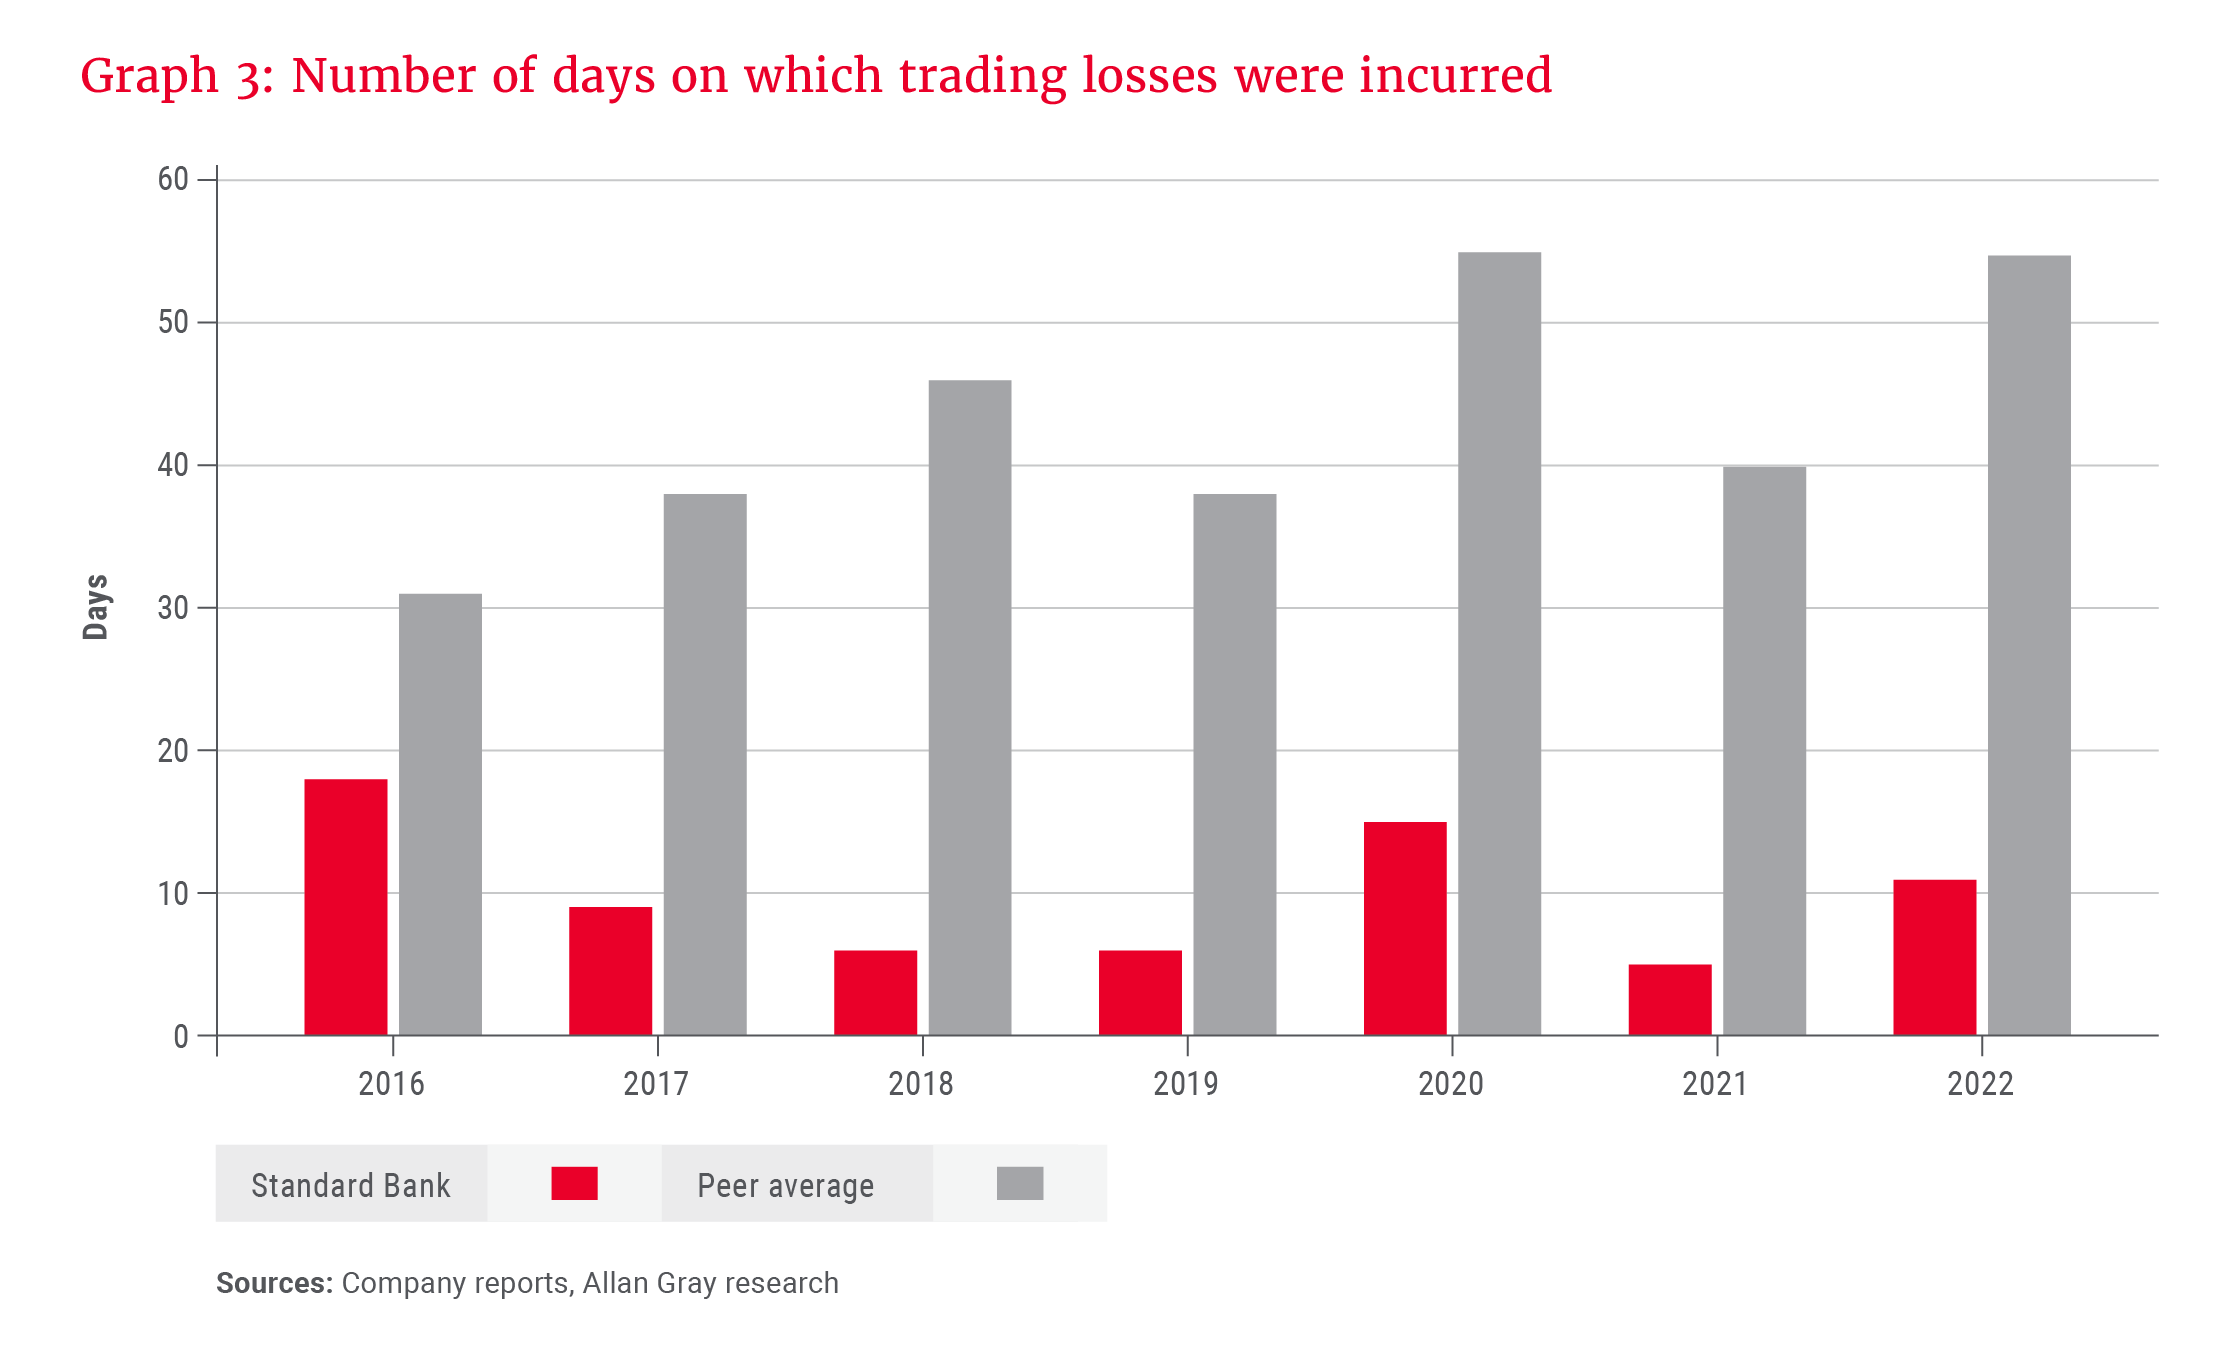 Graph 3_Number of days on which trading losses were incurred_300dpi.png